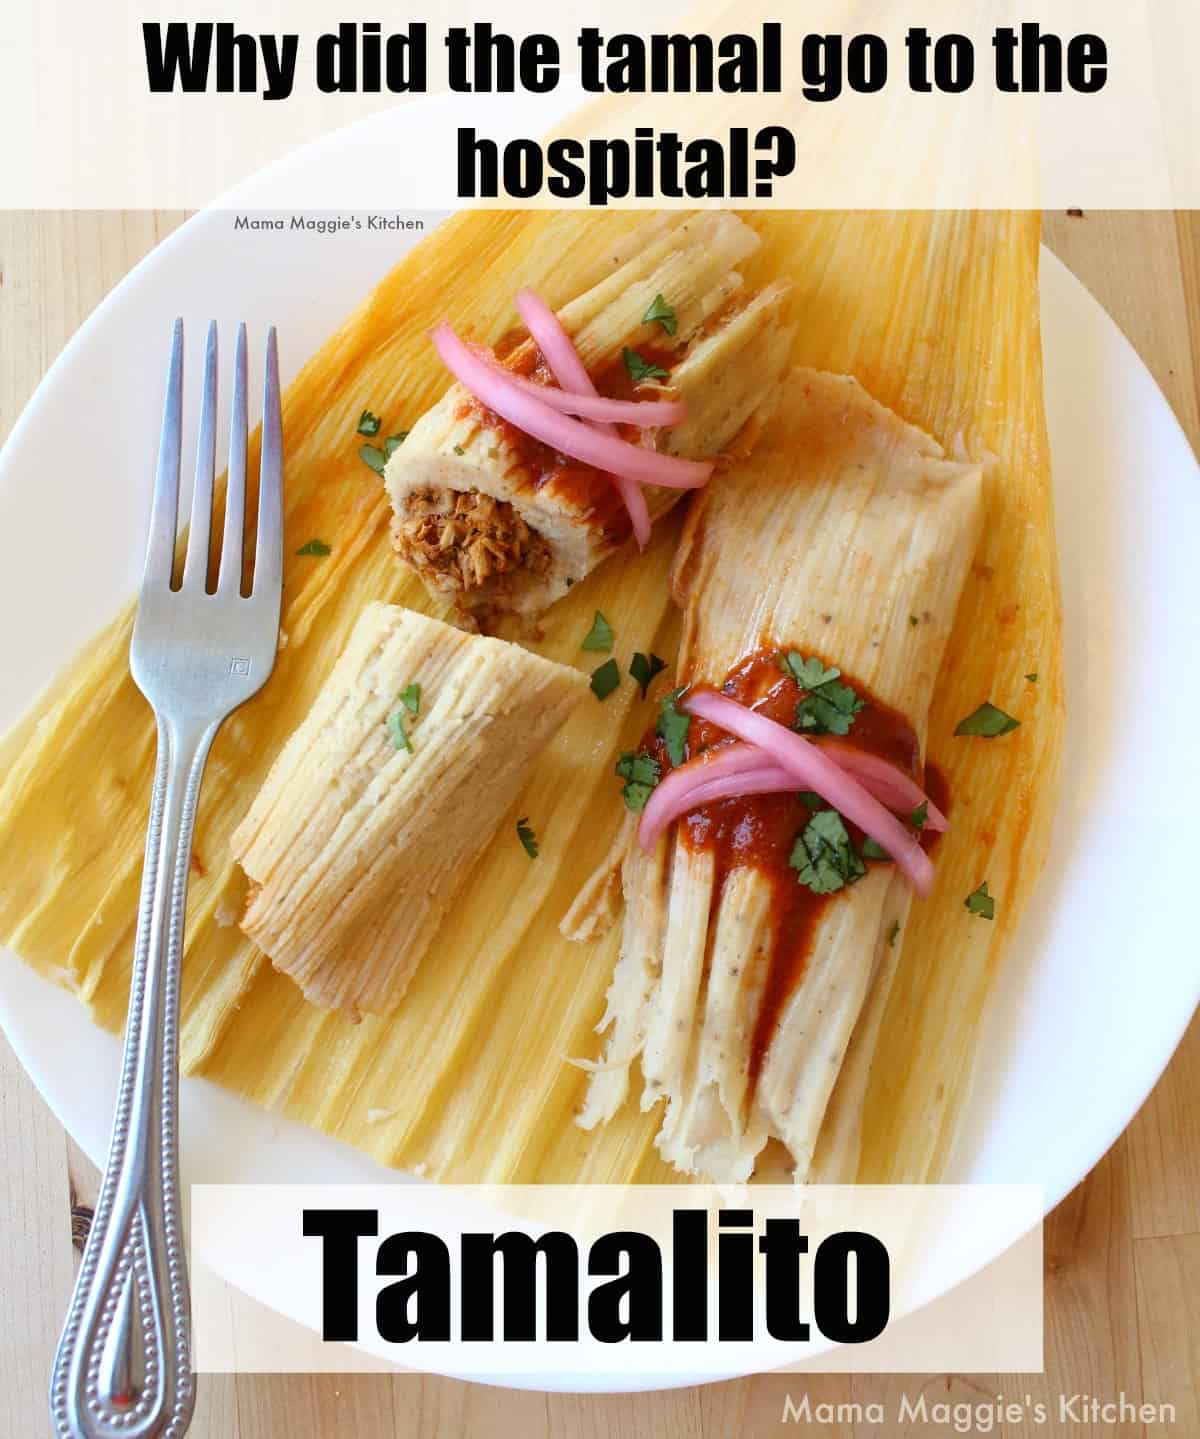 A Mexican meme with two tamales served on a white plate.